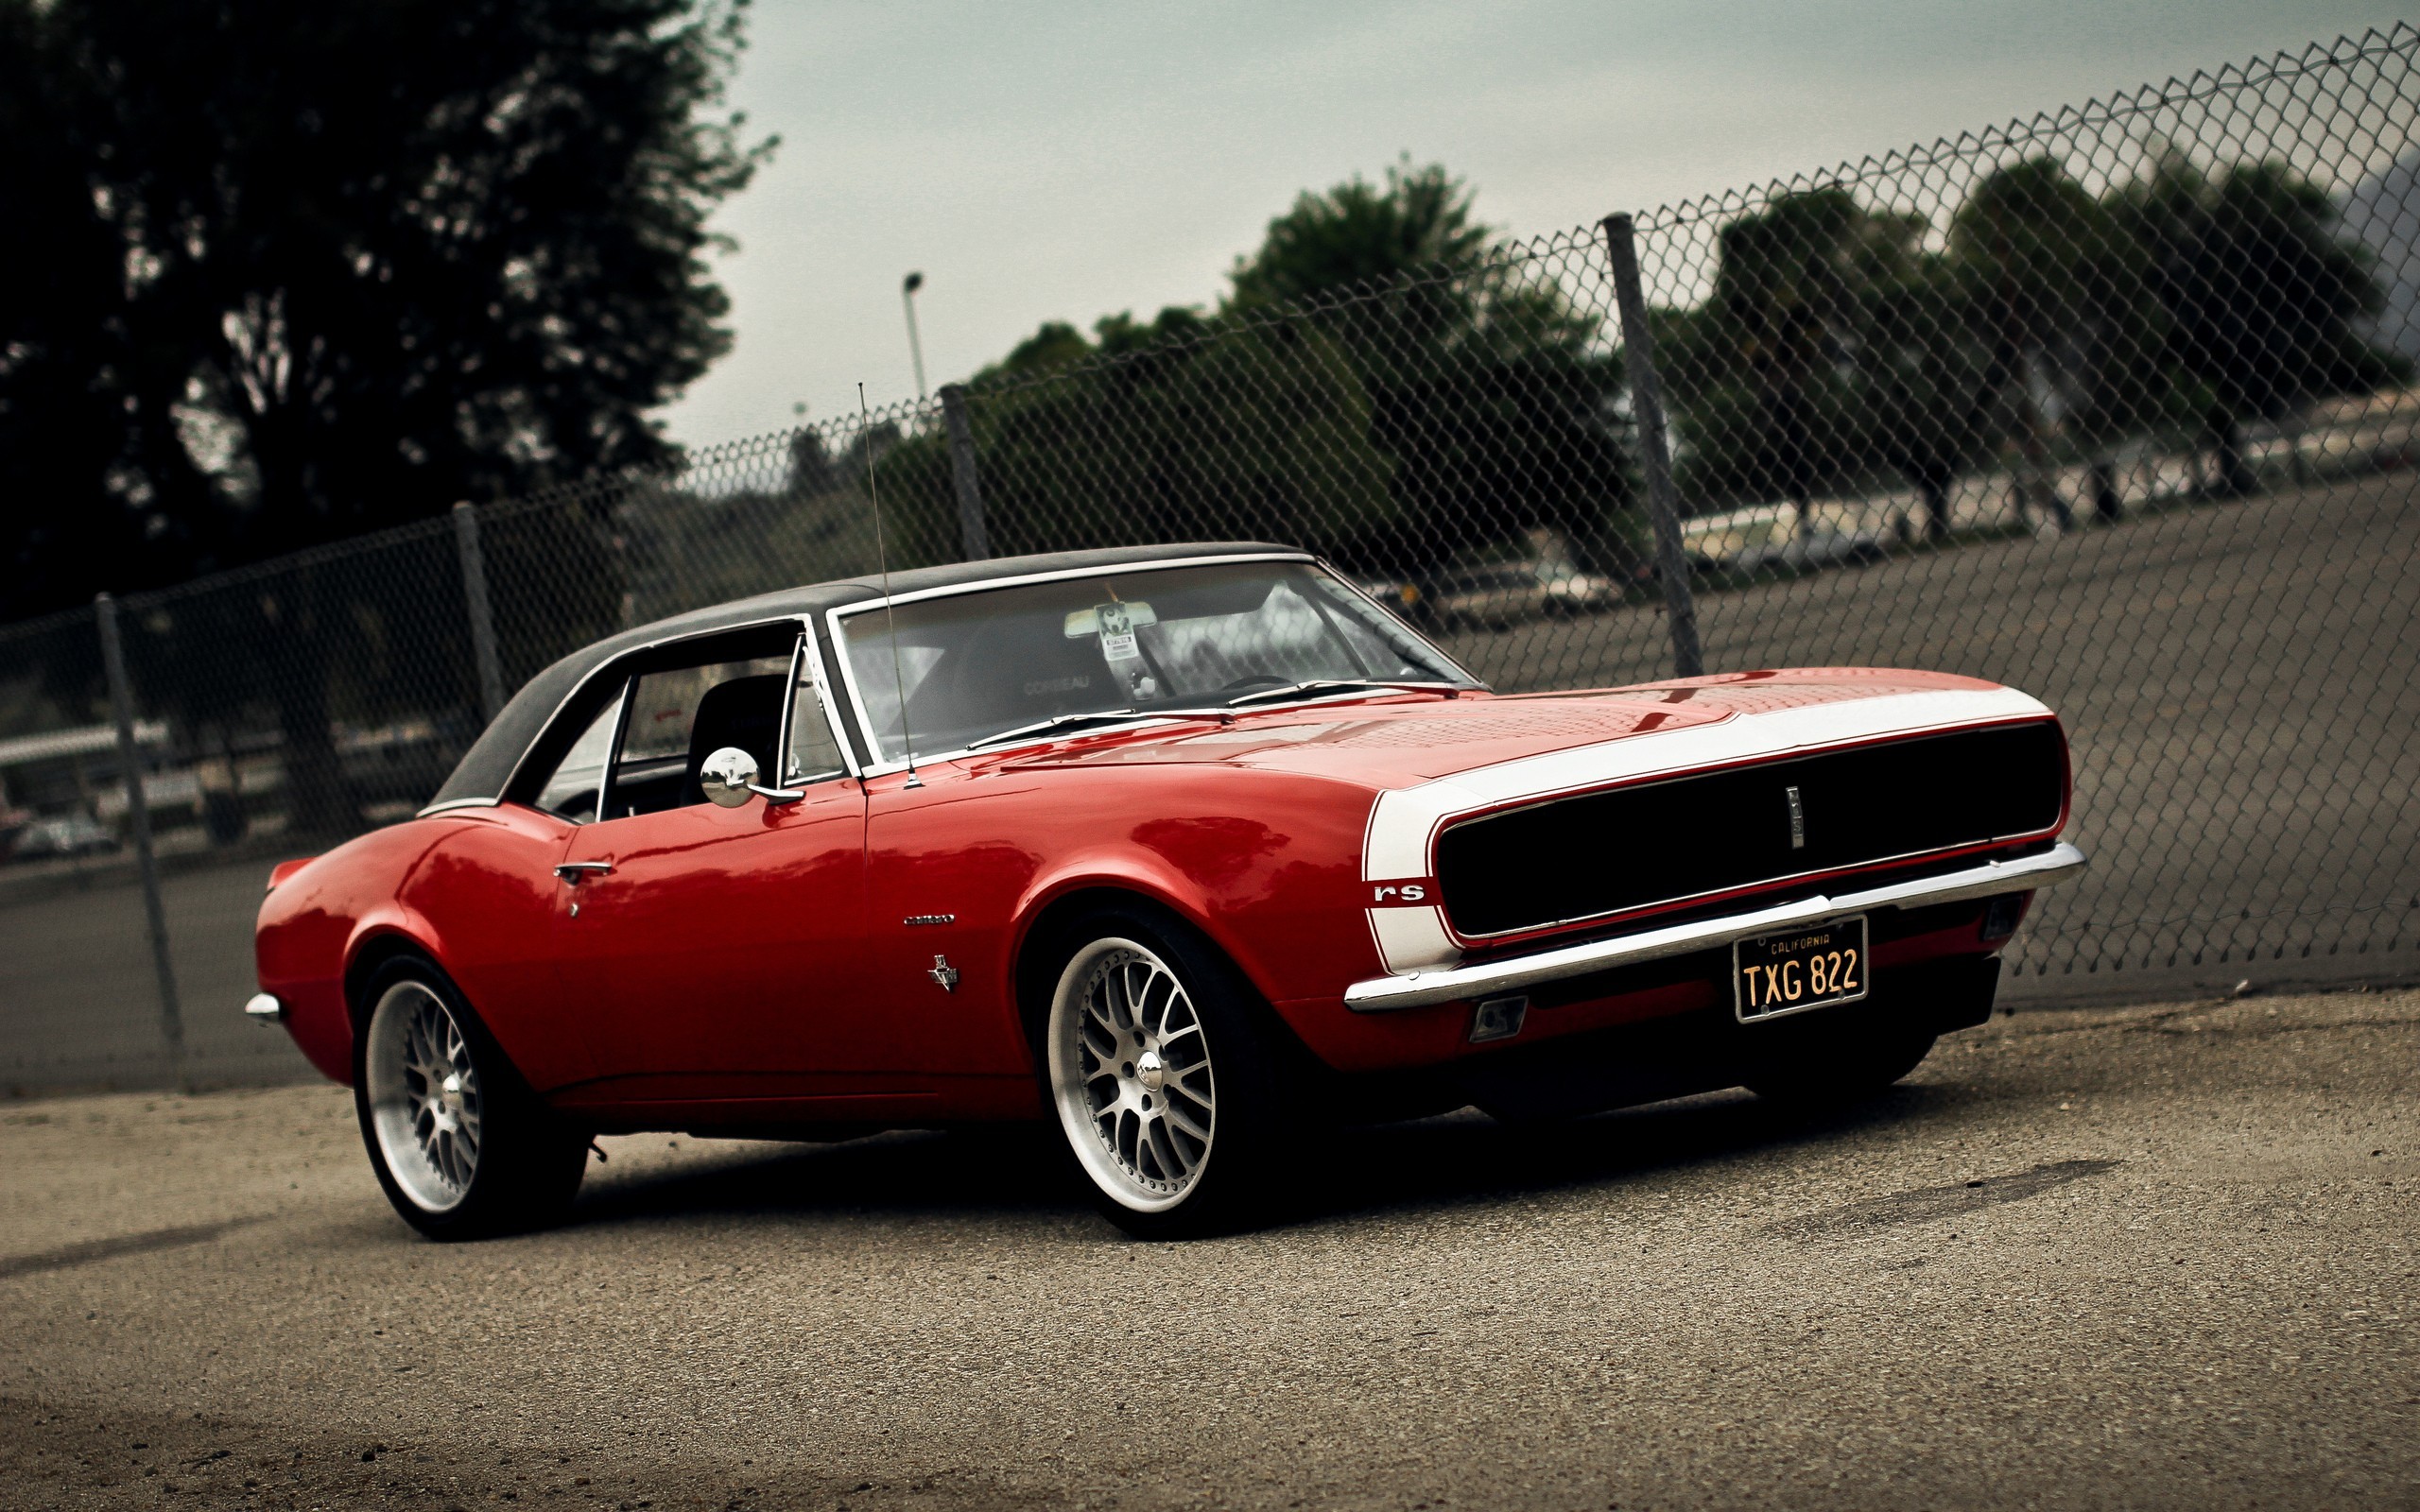 General 2560x1600 car Chevrolet Camaro red cars Chevrolet numbers fence urban muscle cars American cars